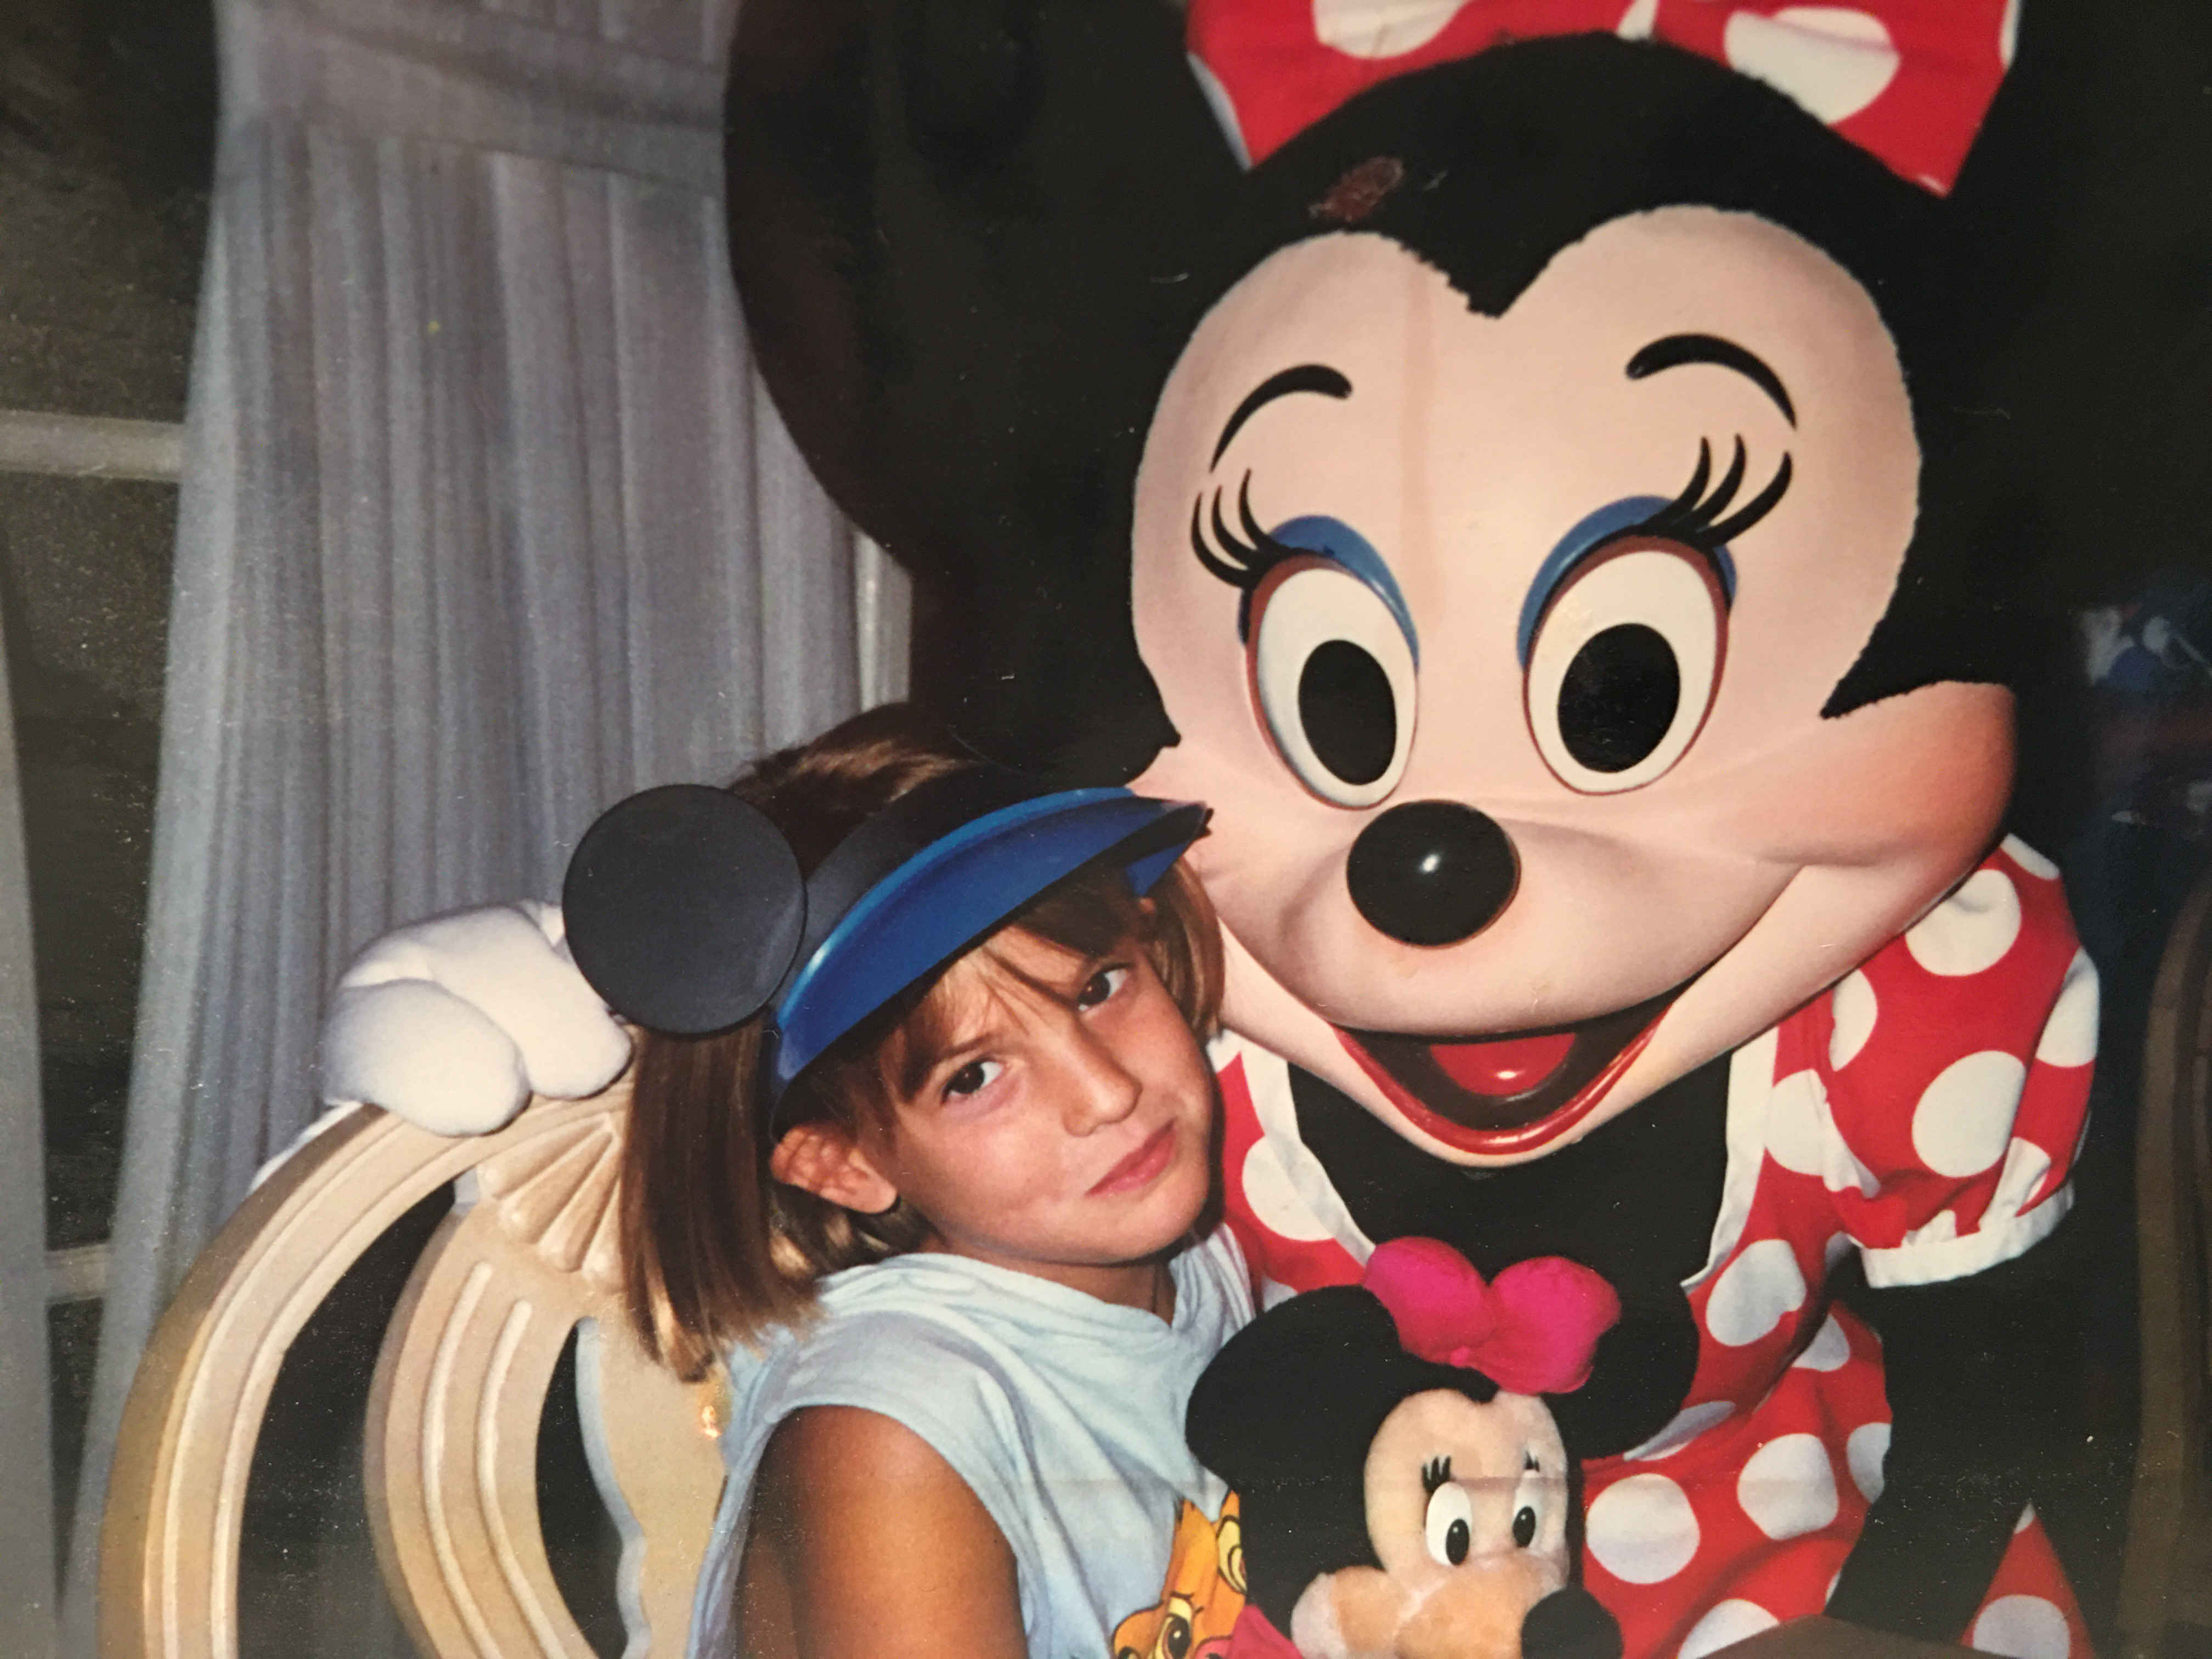 Young Annie hanging out with Minnie Mouse